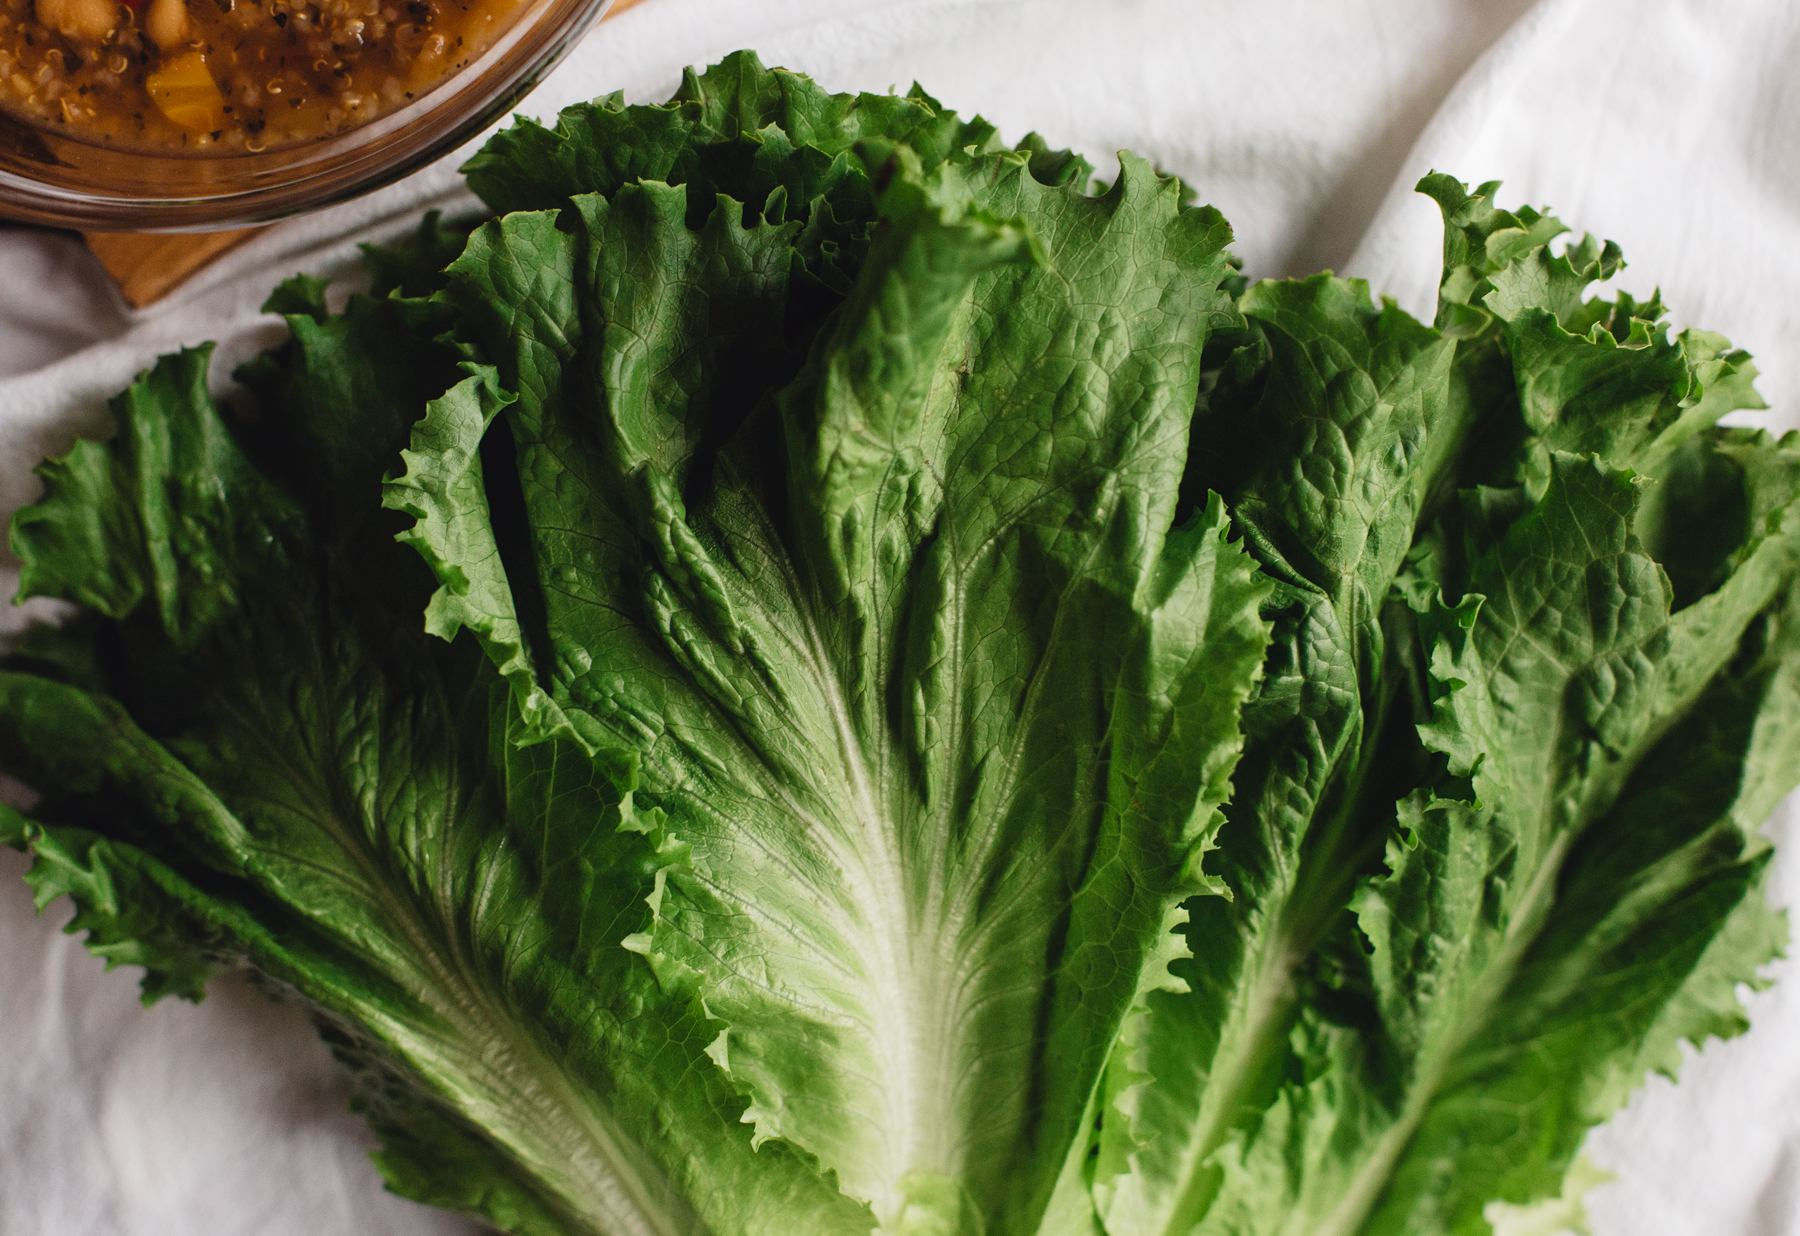 Green Vegetables: A Visual Guide to Leafy Greens | Greatist